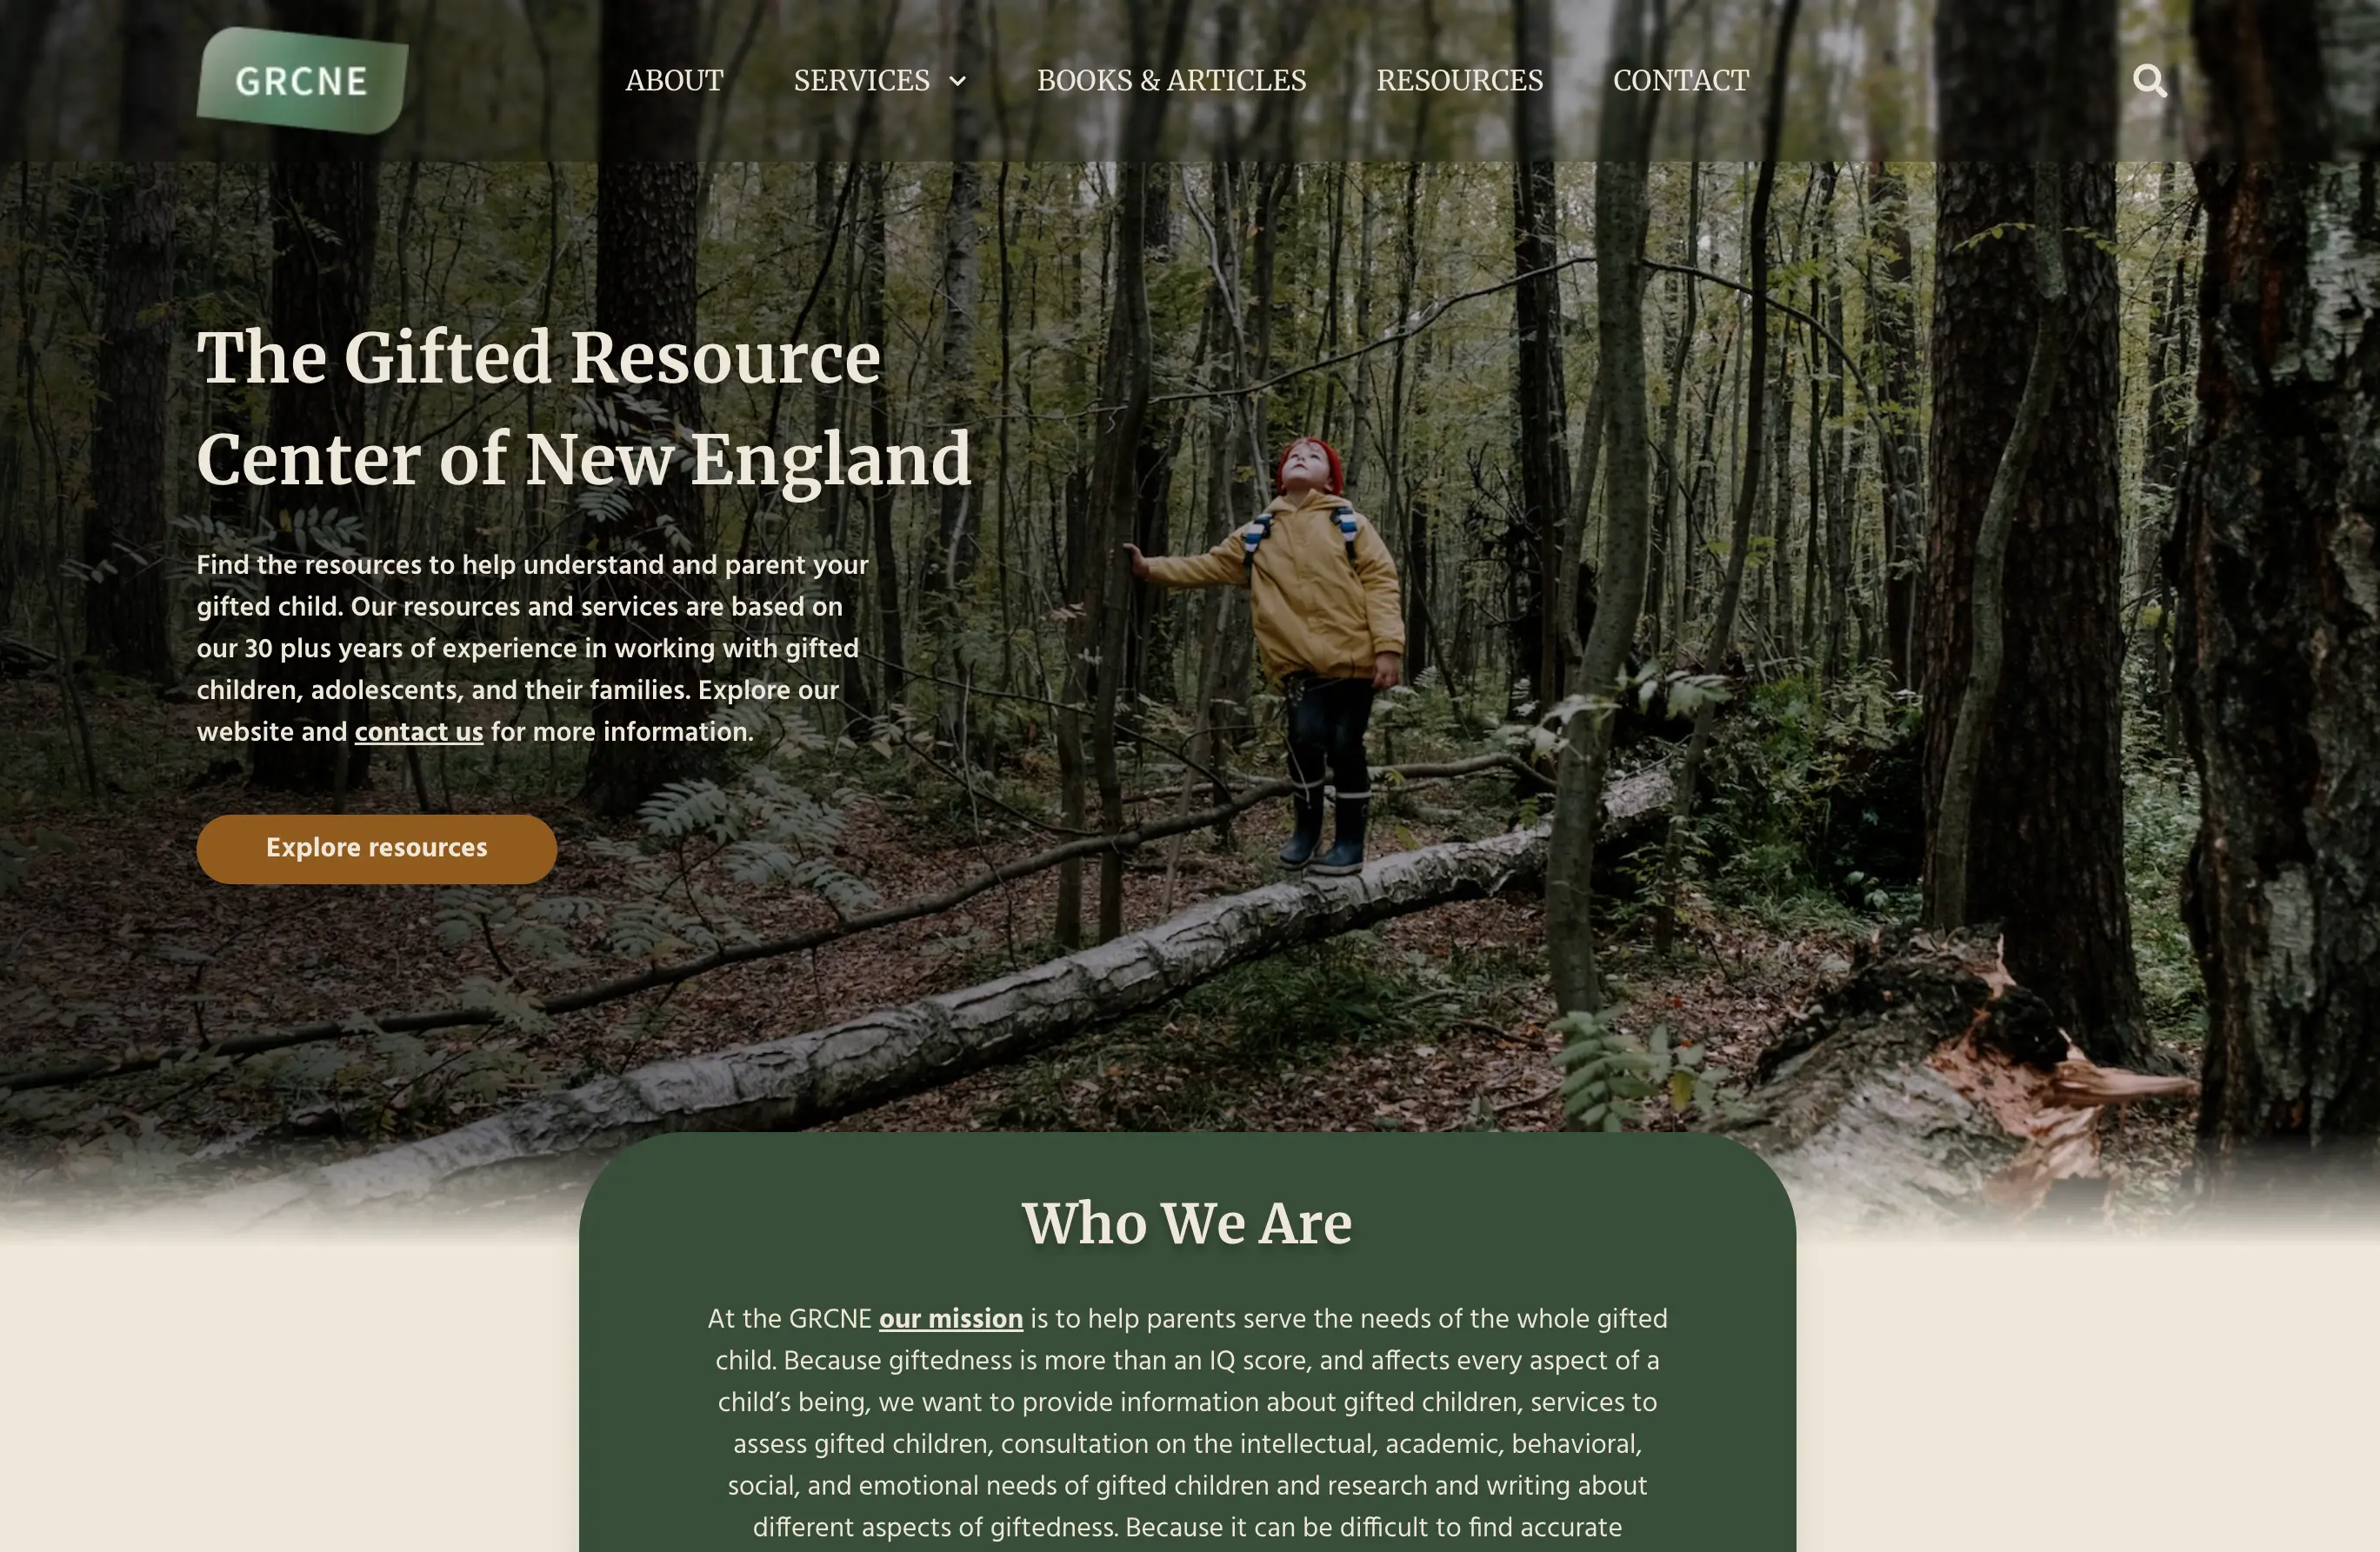 Landing page of the Gifted Resource Center of New England